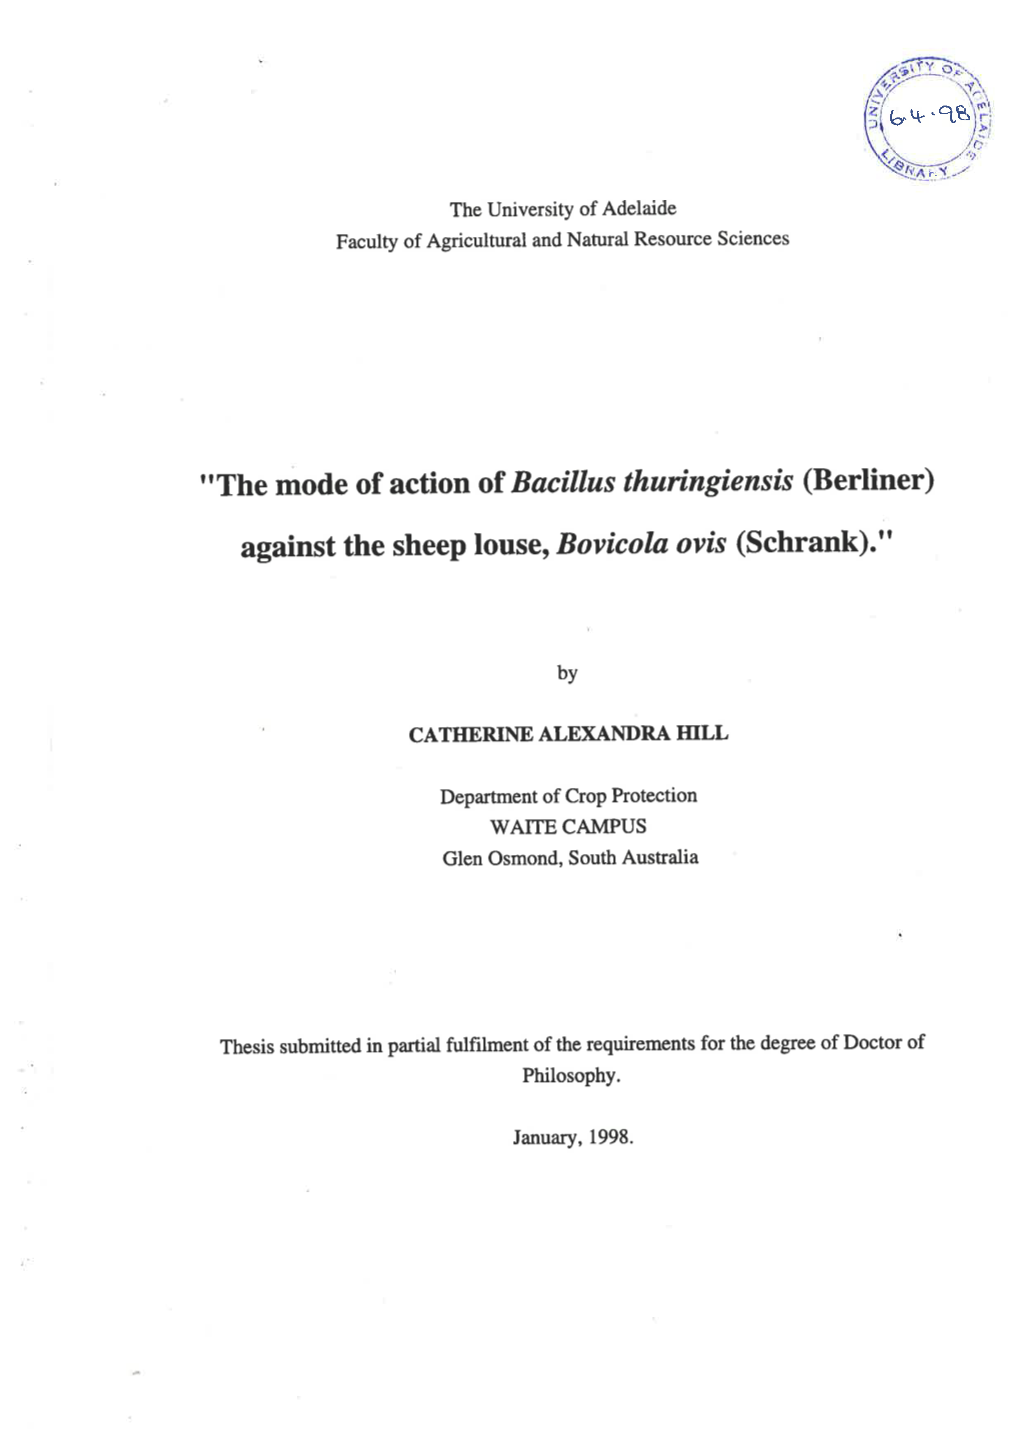 "The Mode of Action of Bacillus Thuringiensis (Berliner) Against The